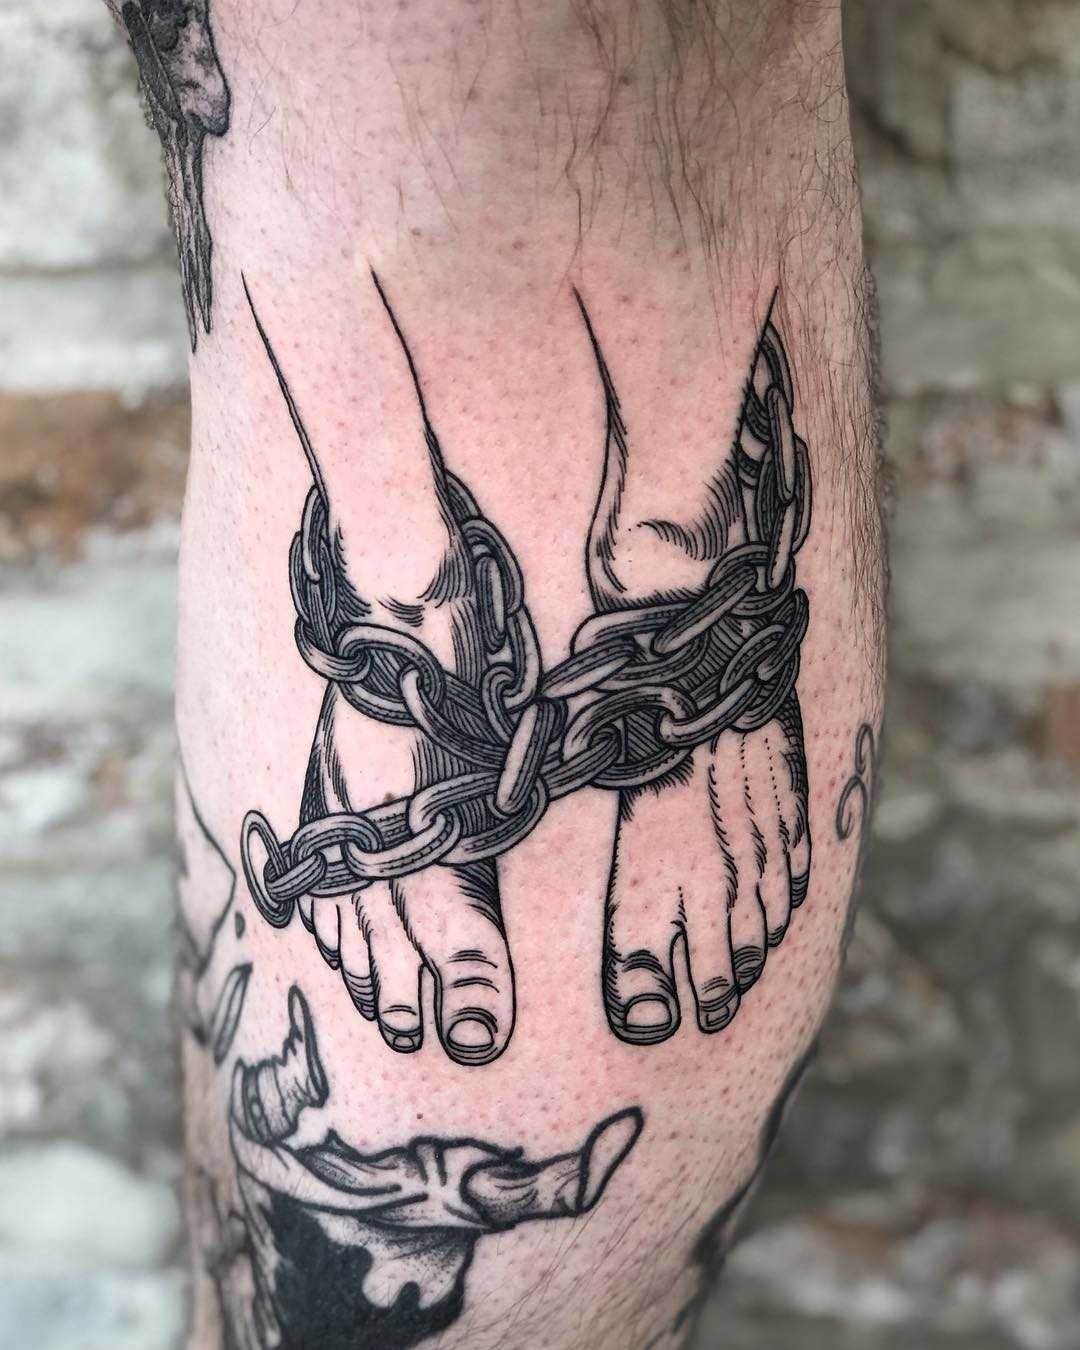 Chained legs tattoo by Tine DeFiore